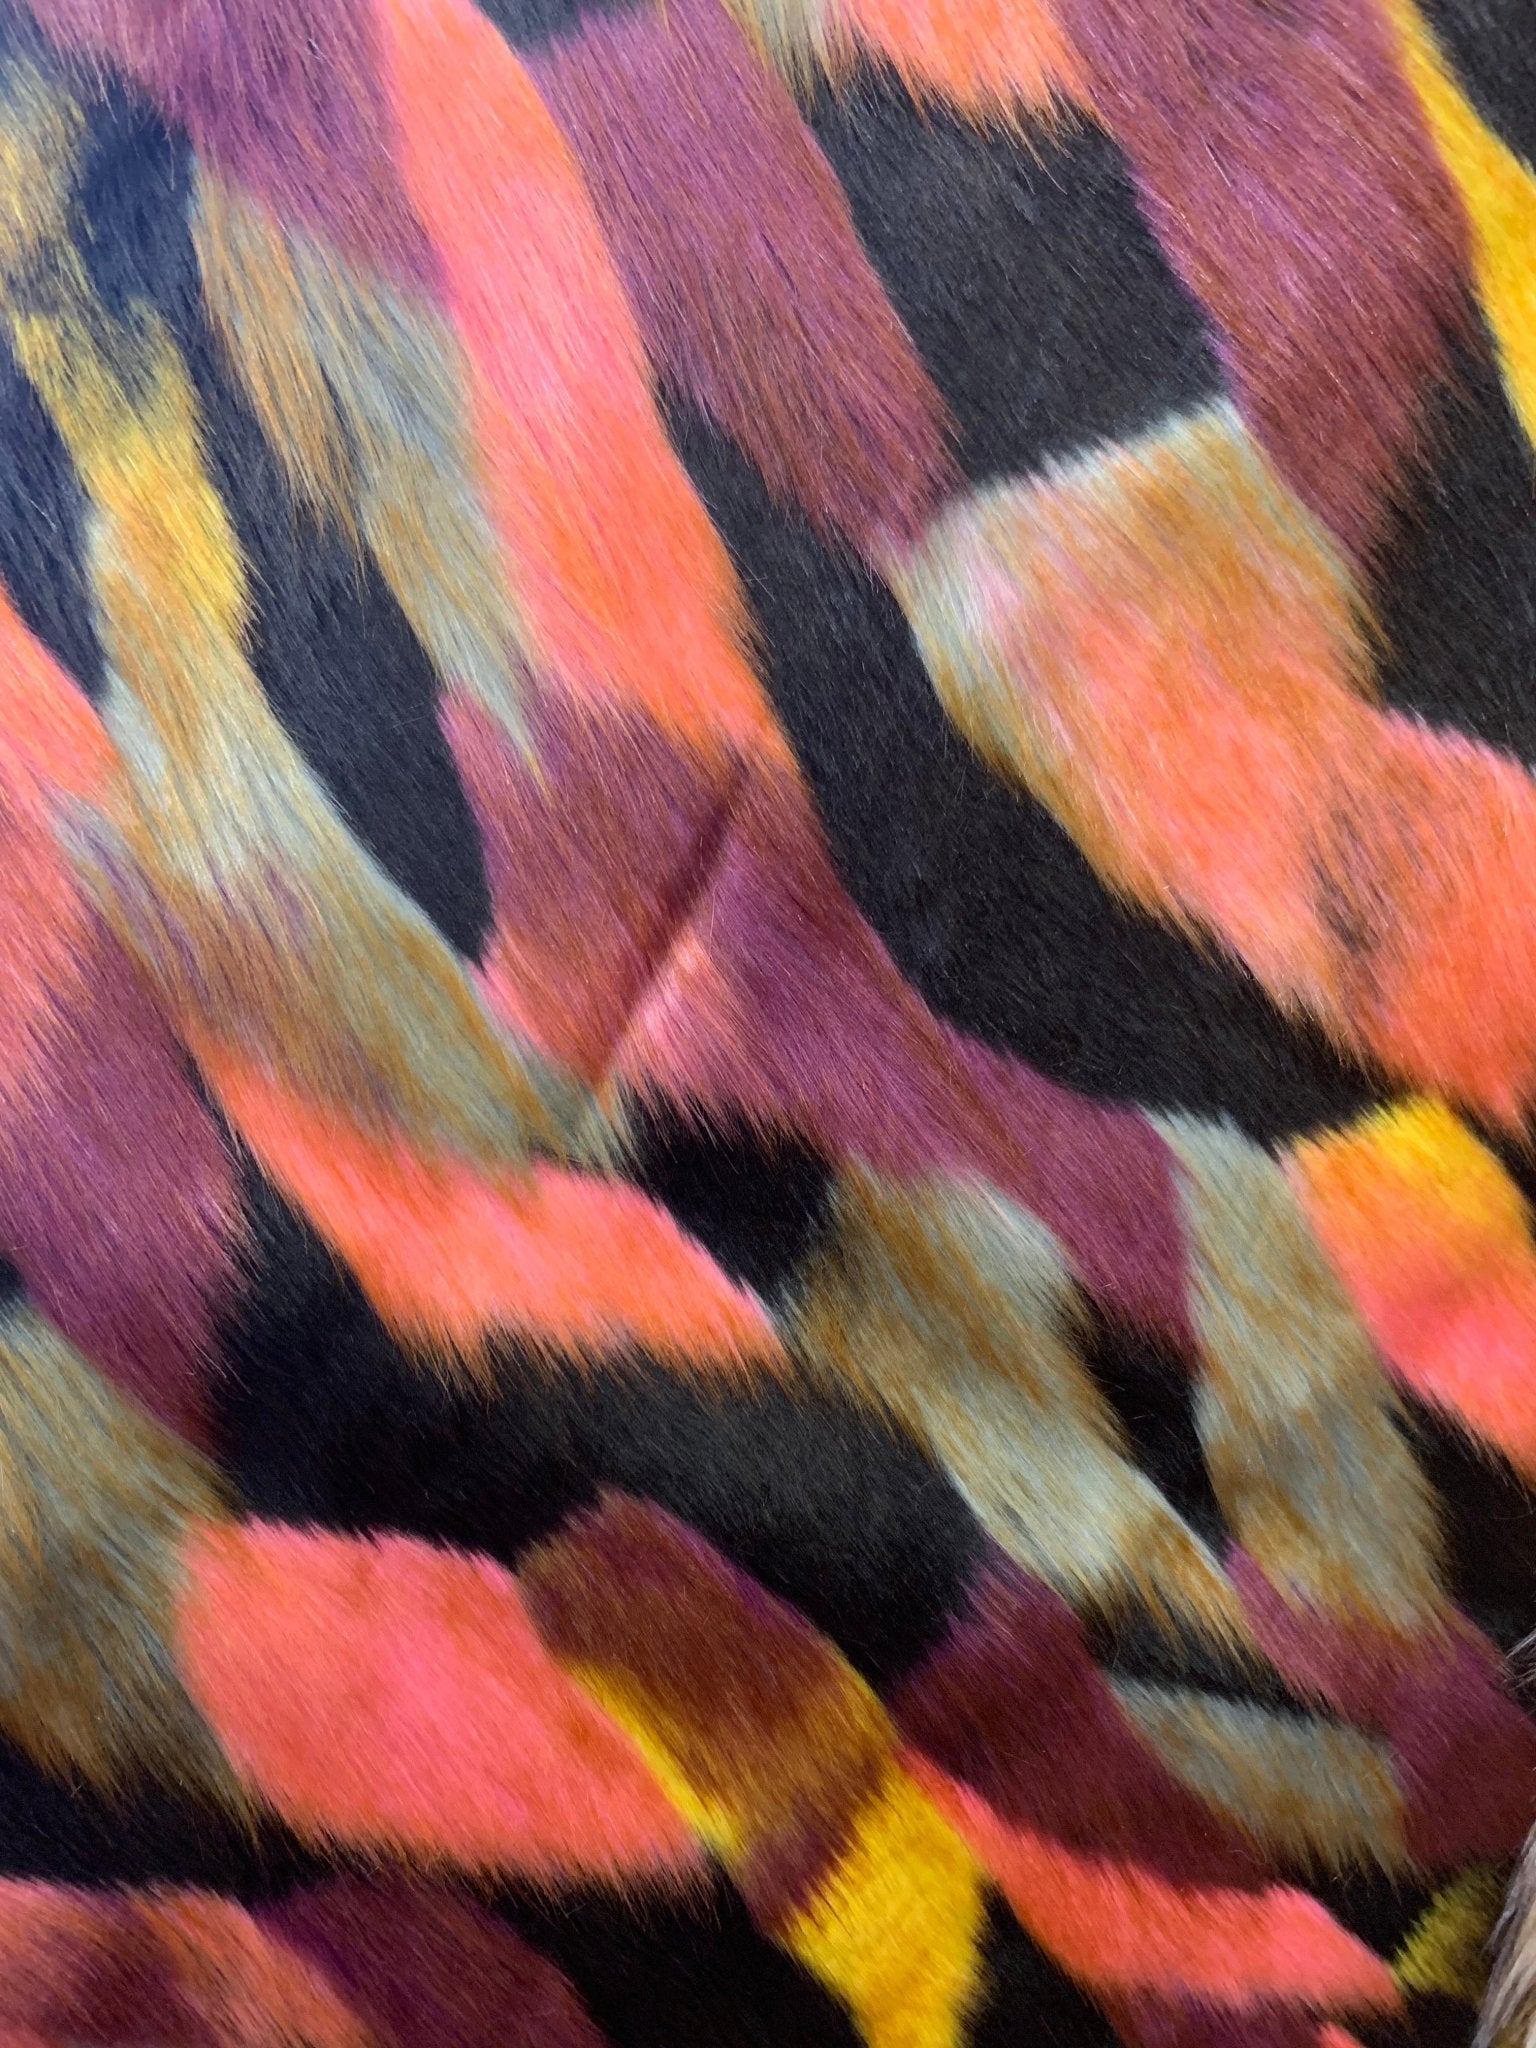 Fashion Fabric Black, Purple, Yellow, and Coral Multicolor Faux Fur Material By The YardICEFABRICICE FABRICSBy The Yard (60 inches Wide)Fashion Fabric Black, Purple, Yellow, and Coral Multicolor Faux Fur Material By The Yard ICEFABRIC